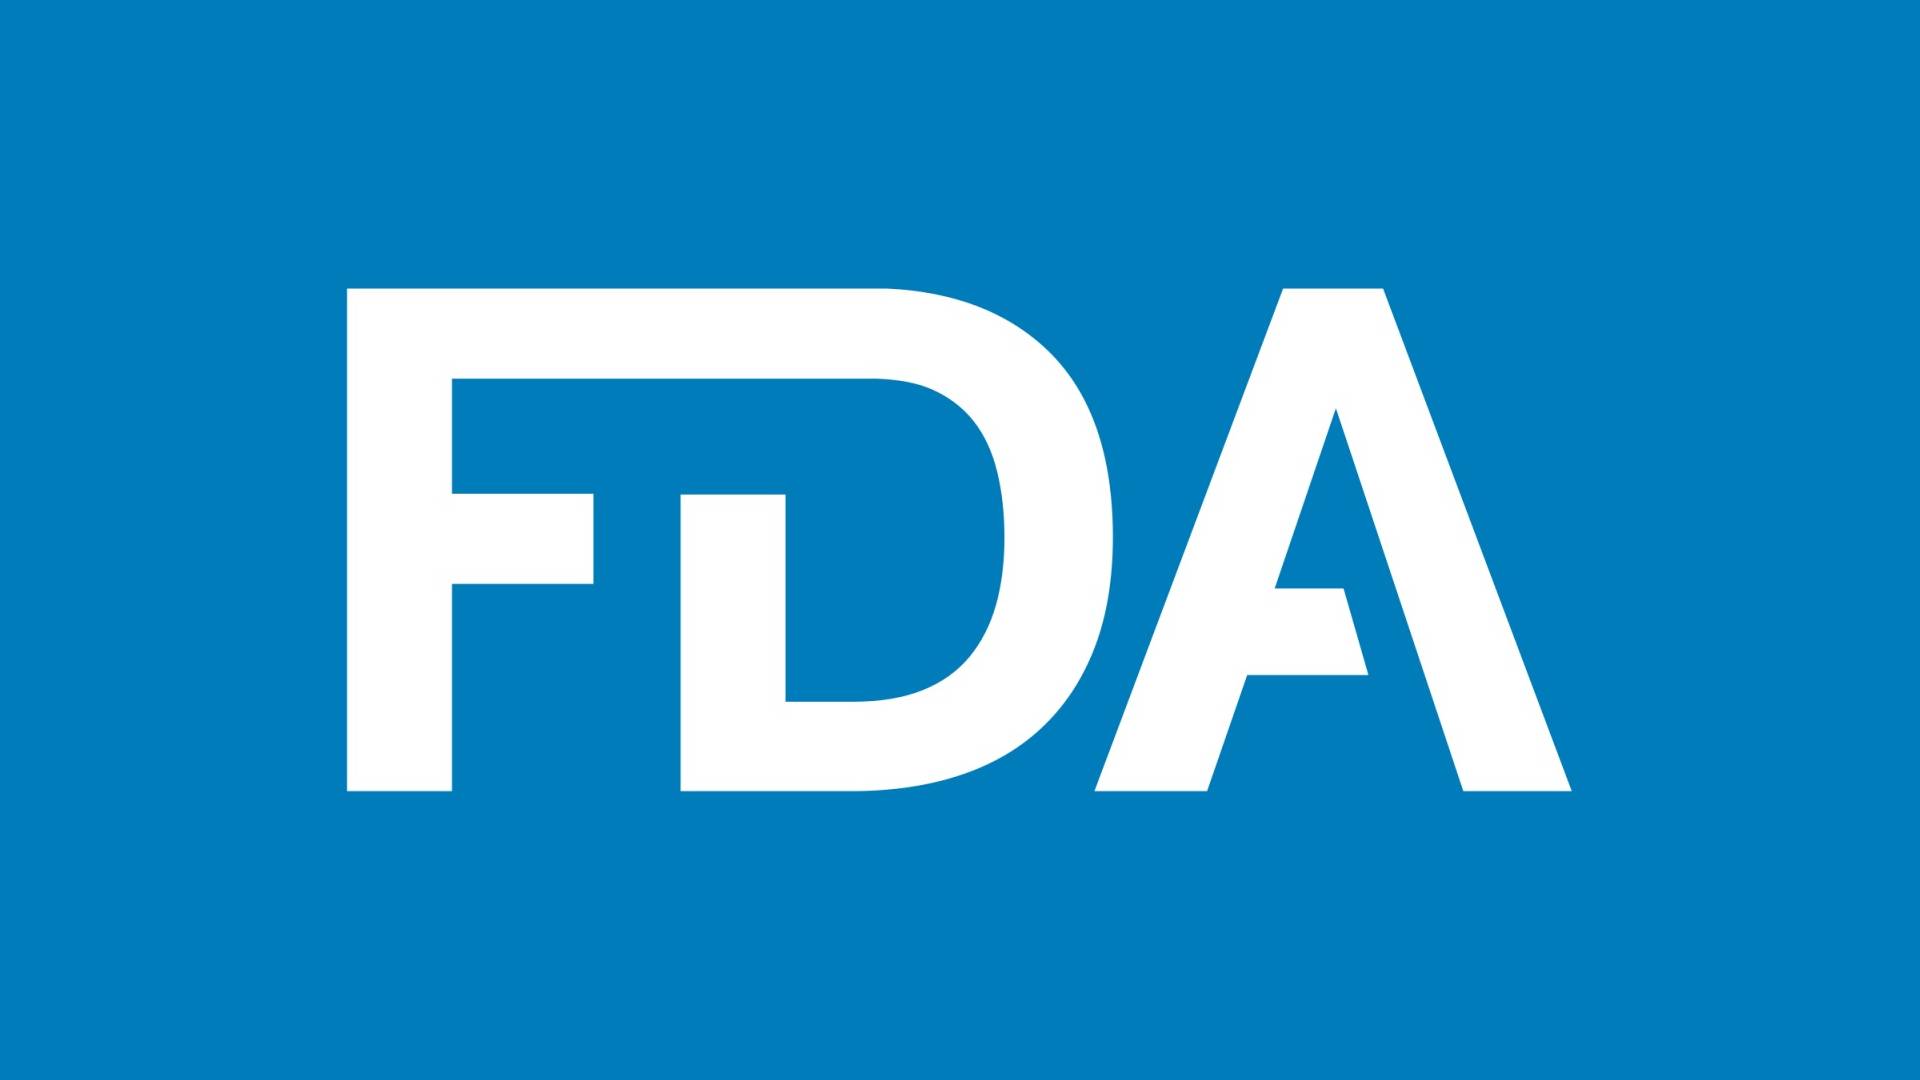 Health News Roundup: FDA's graphic warning labels for cigarettes are constitutional, US appeals court rules; China's Stemirna halts mRNA cancer vaccine trial, researchers say and more